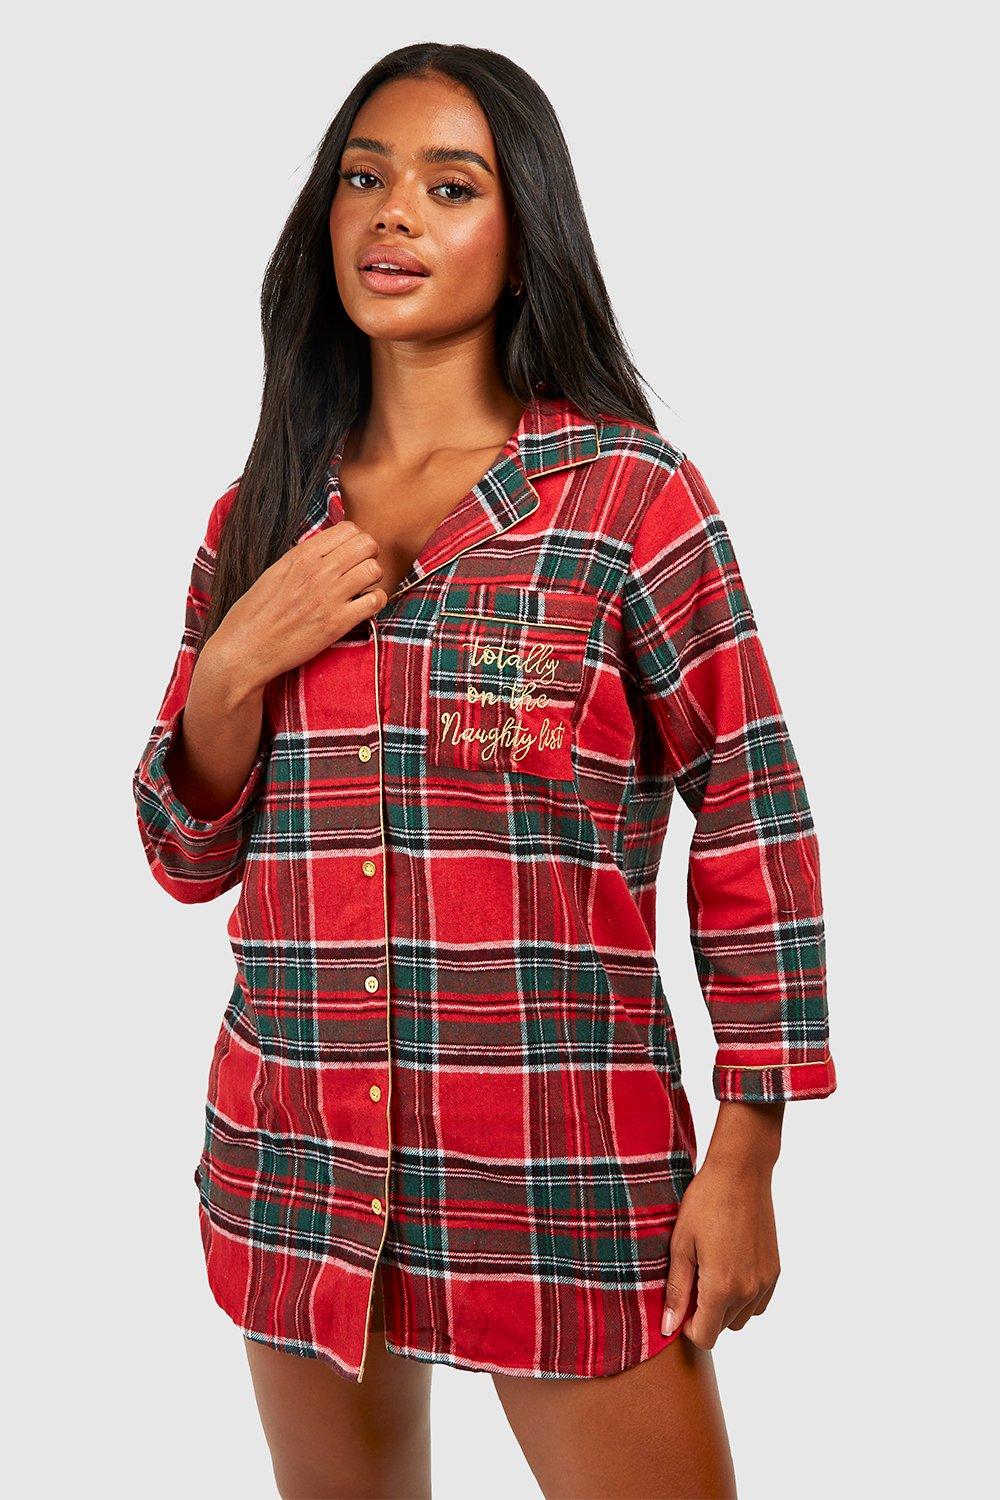 boohoo Women's Christmas Naughty List Embroidered Flannel Night Shirt|Size: 14|red